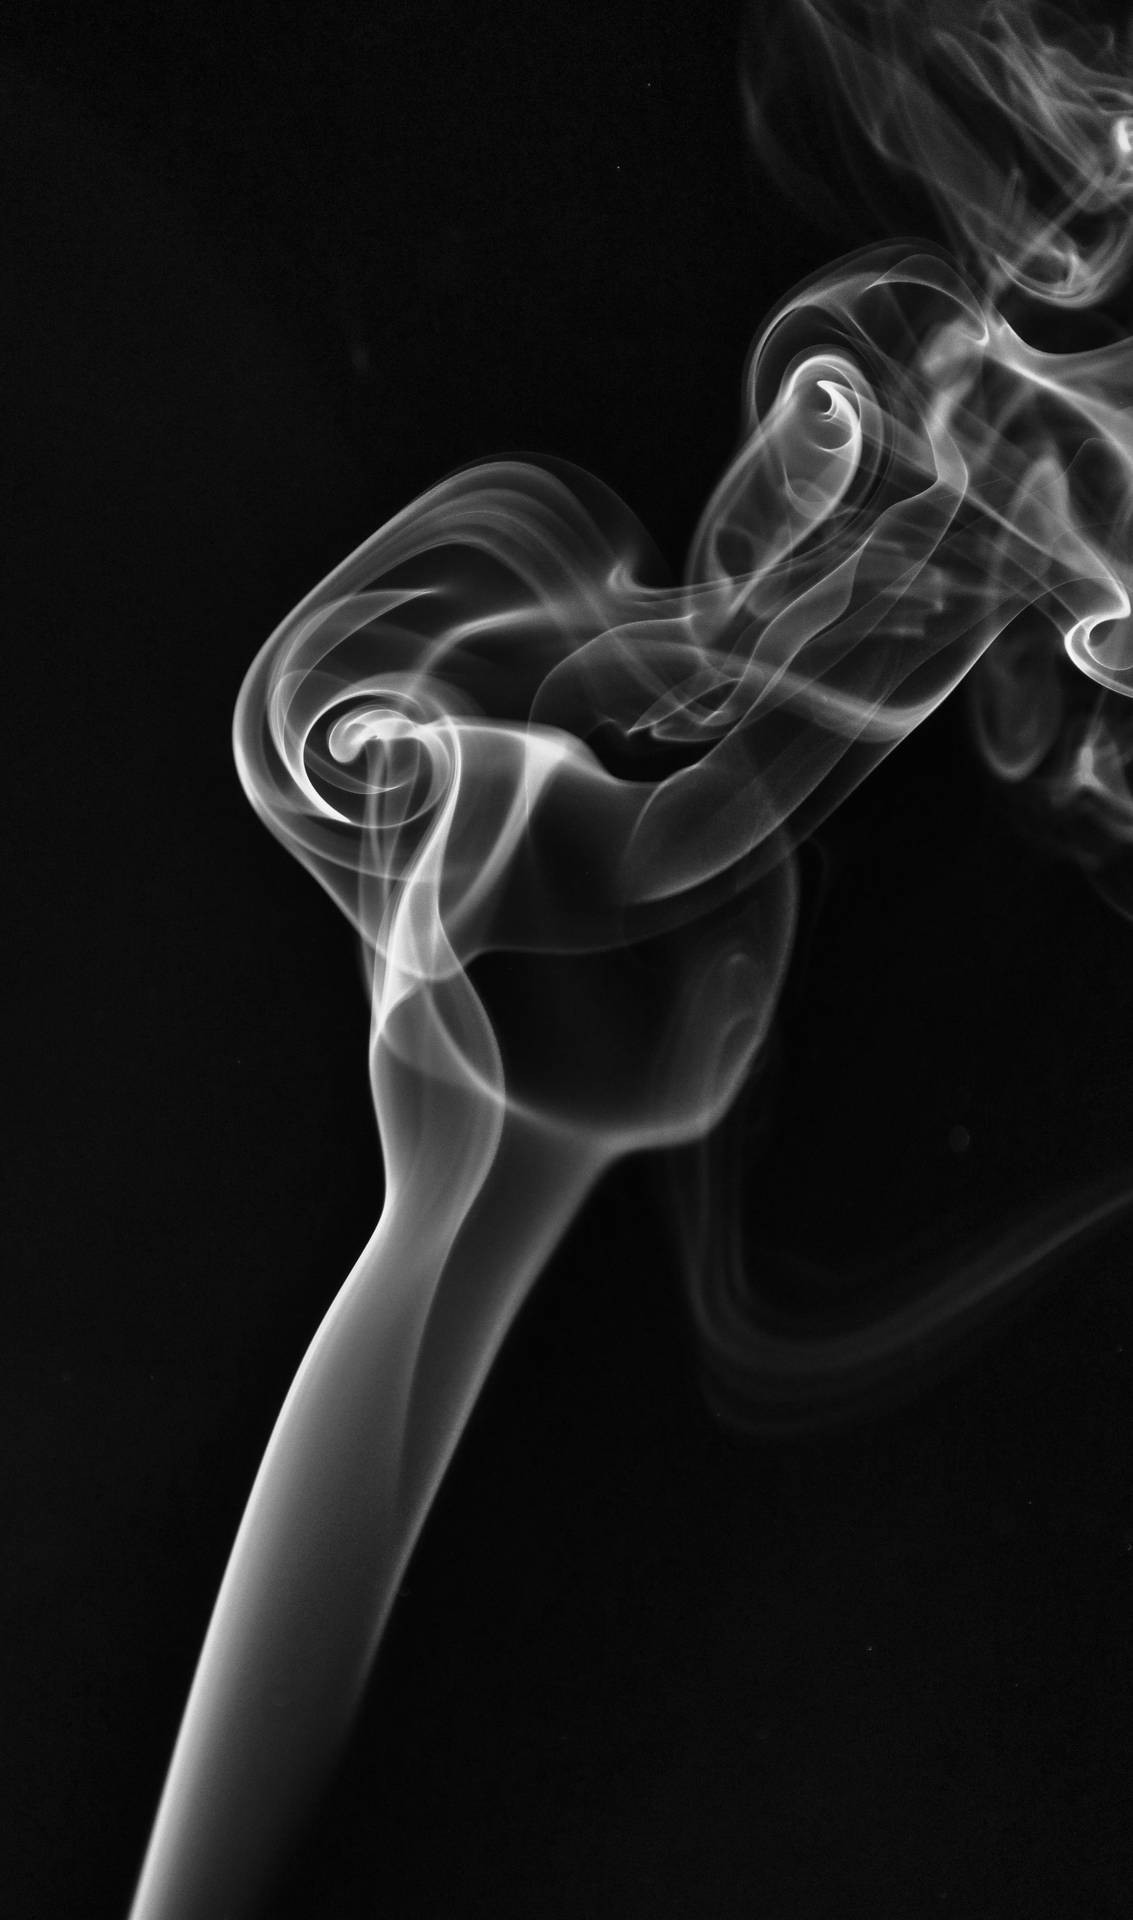 White Smoke Emanating From An Unknown Source In A Dark Environment. Wallpaper